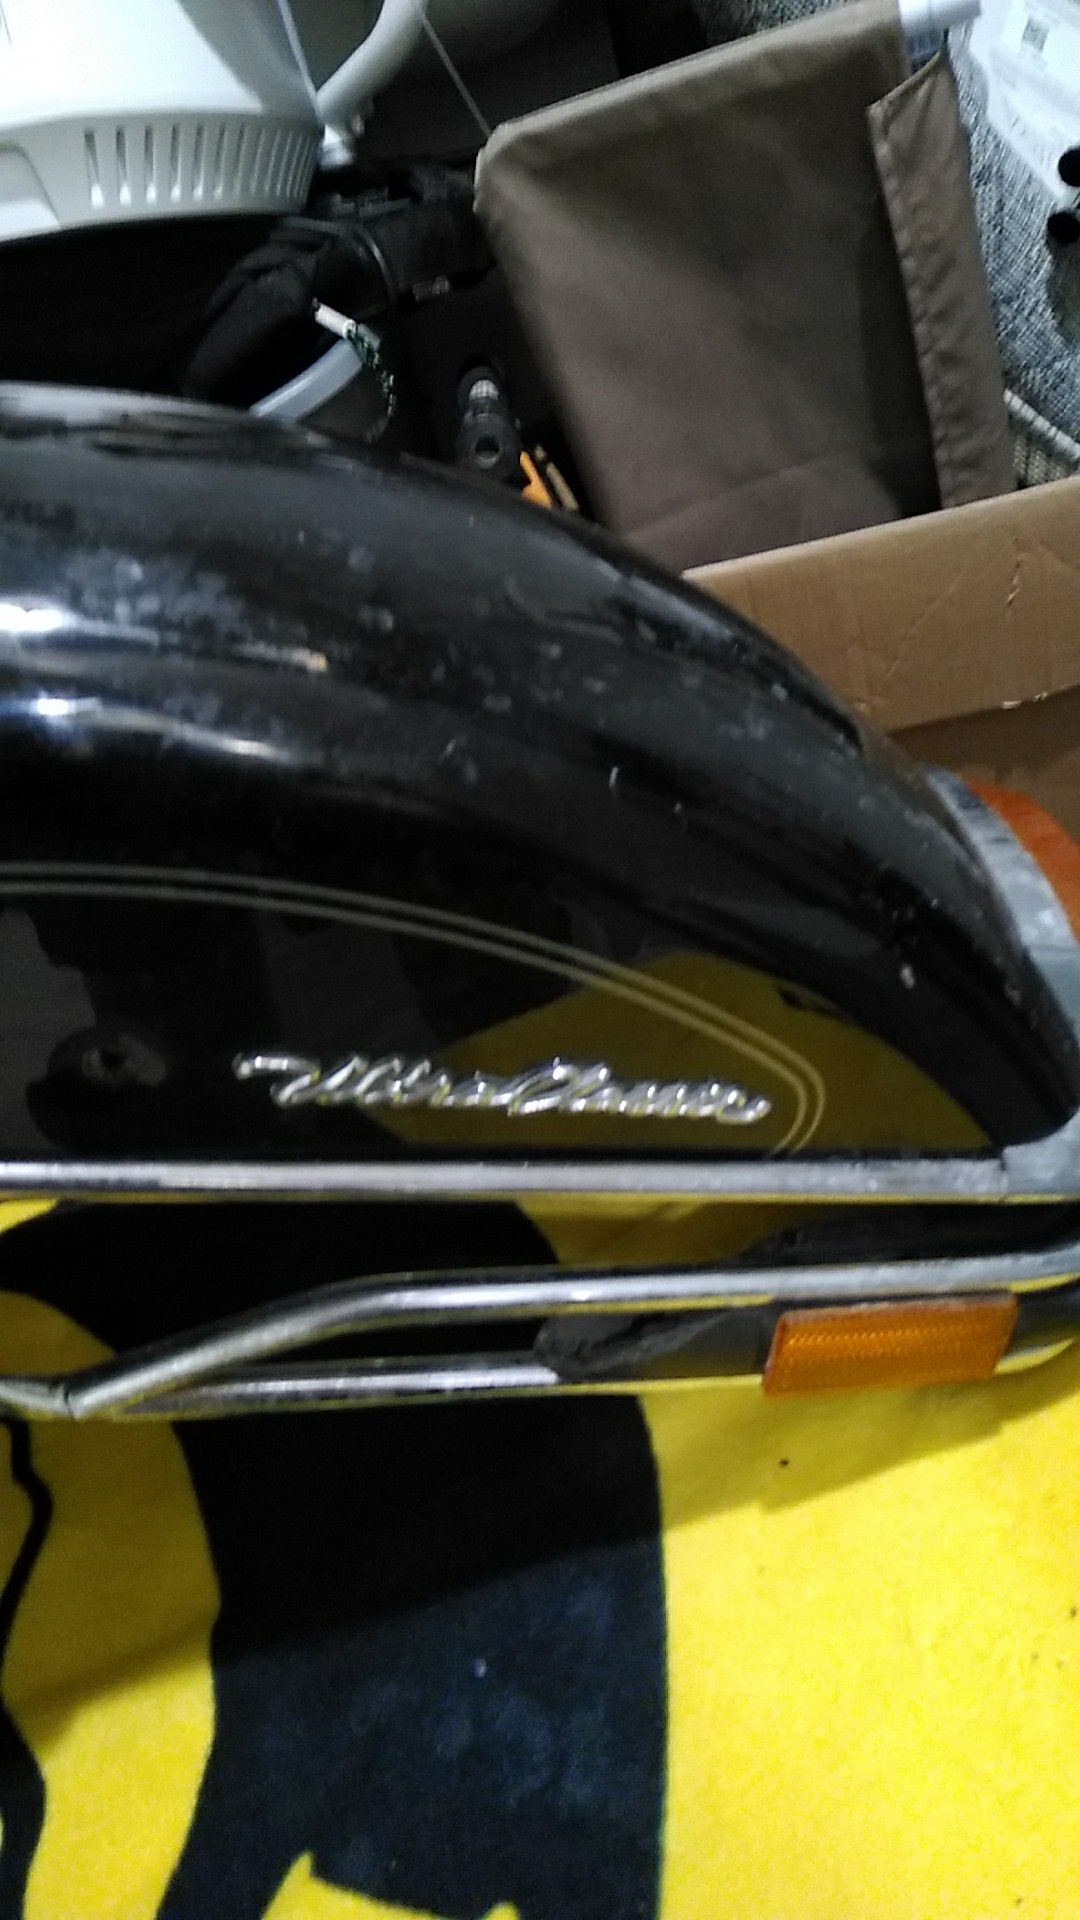 It's a fender for a old Harley